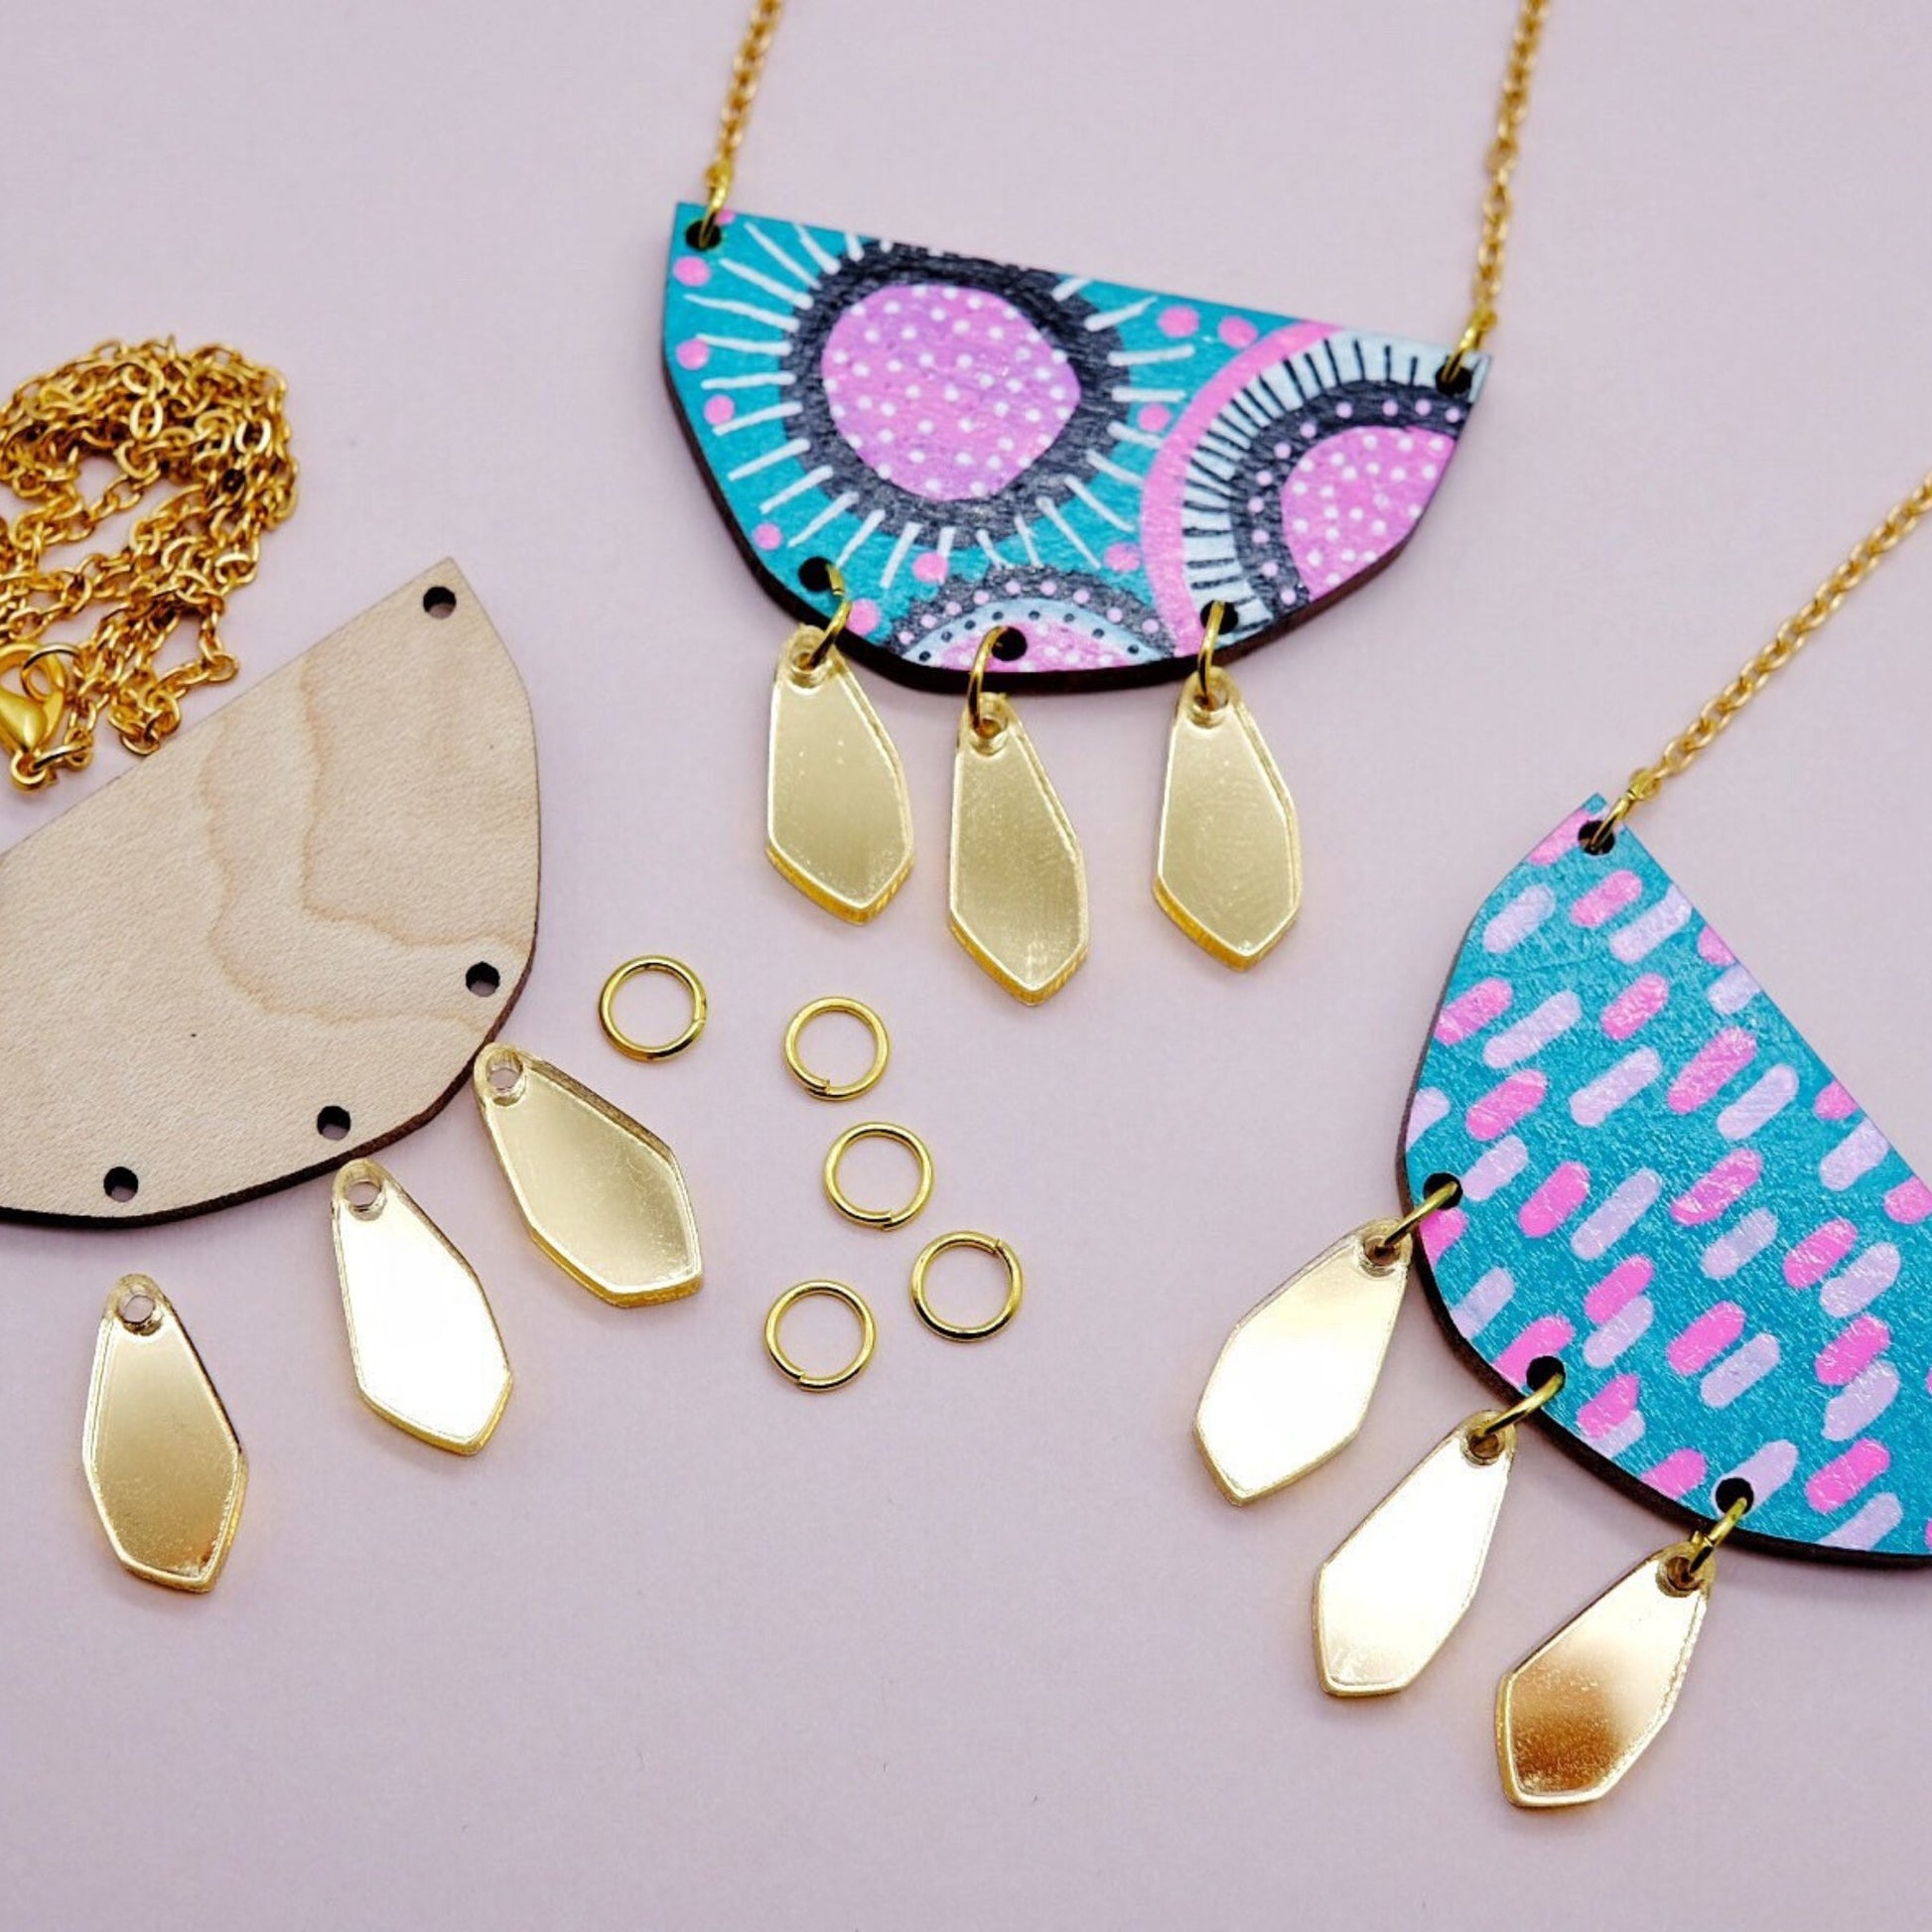 Make Your Own Necklace Kit (Dark) - The Little Jewellery Company